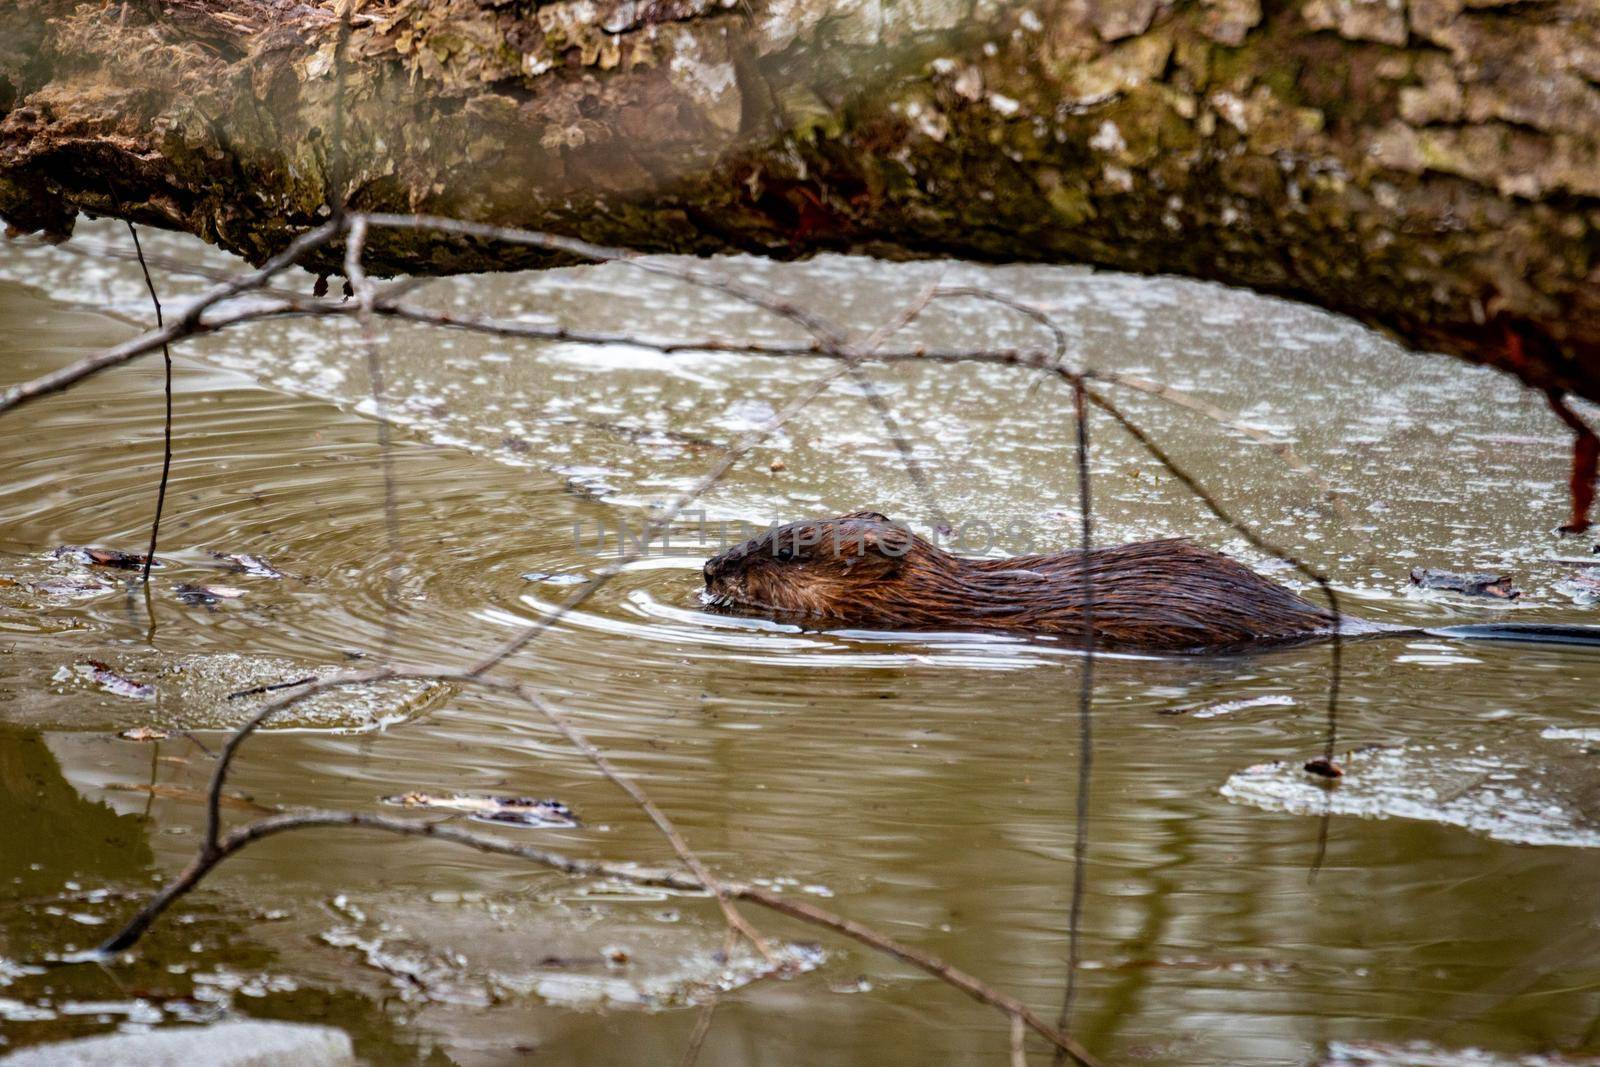 A young beaver swims in a partly frozen canadian water stream by mynewturtle1